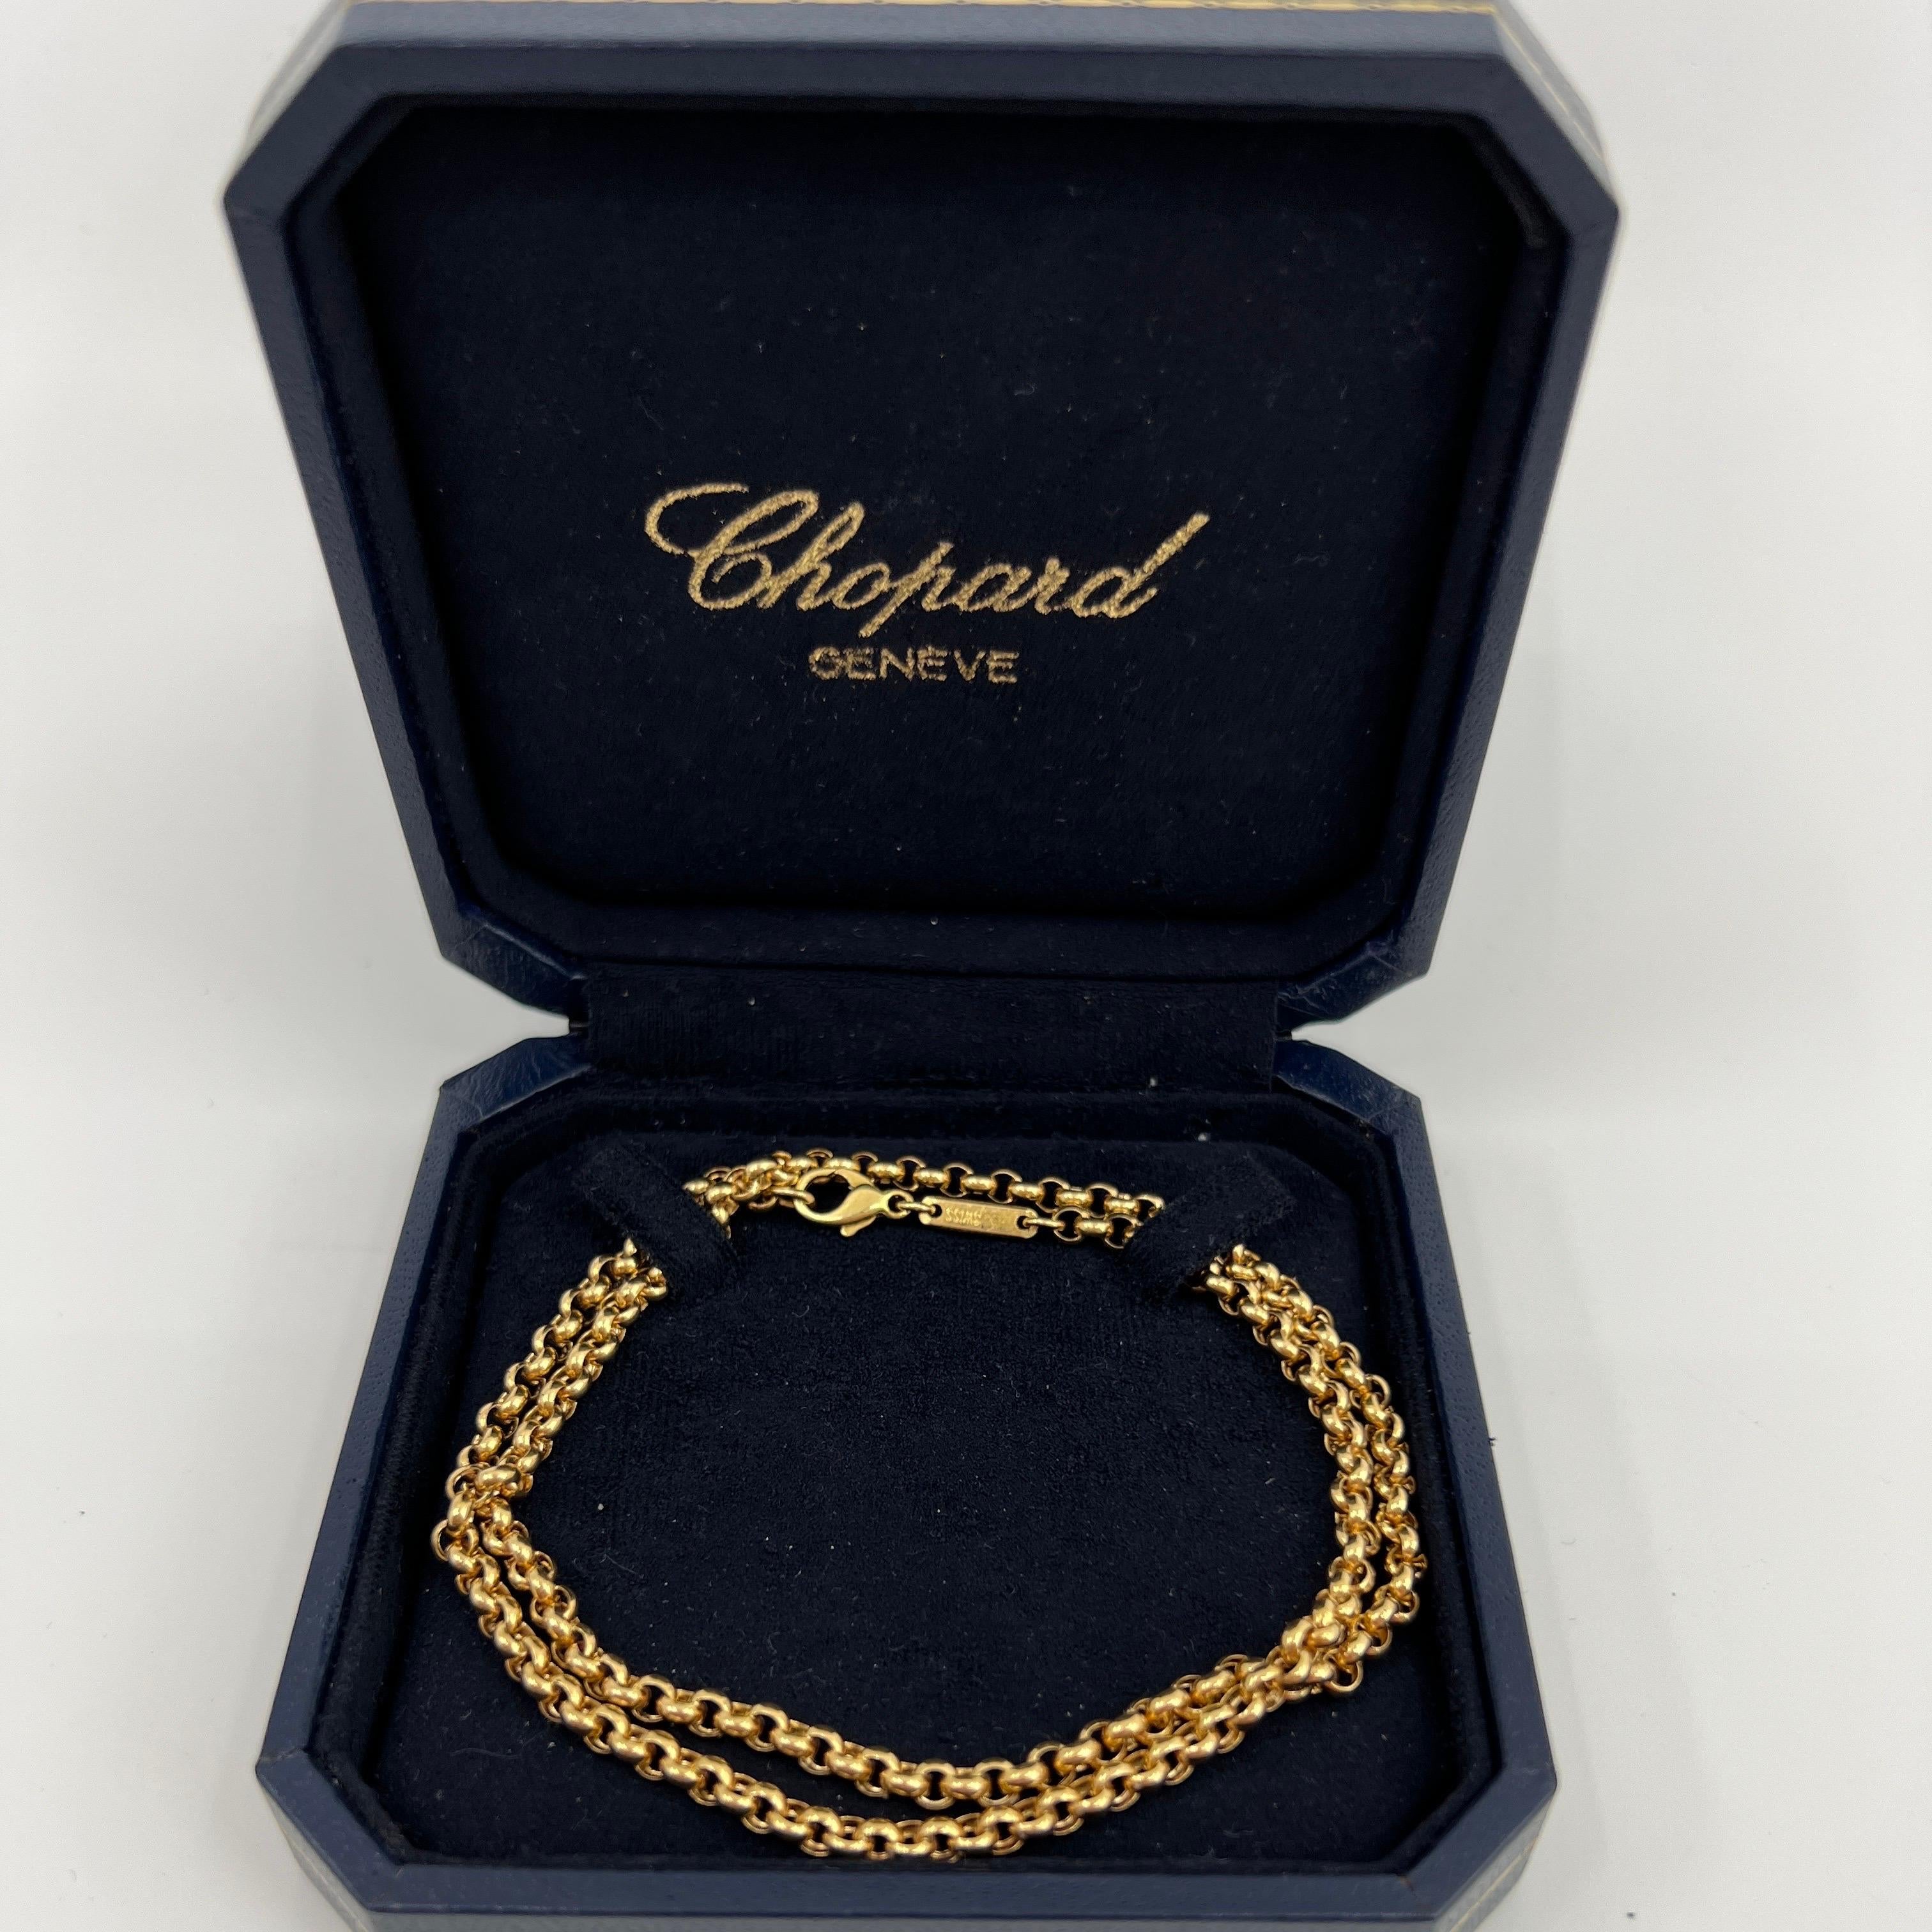 Fine Chopard 18k Yellow Gold Belcher Pendant Necklace Chain with Box 2